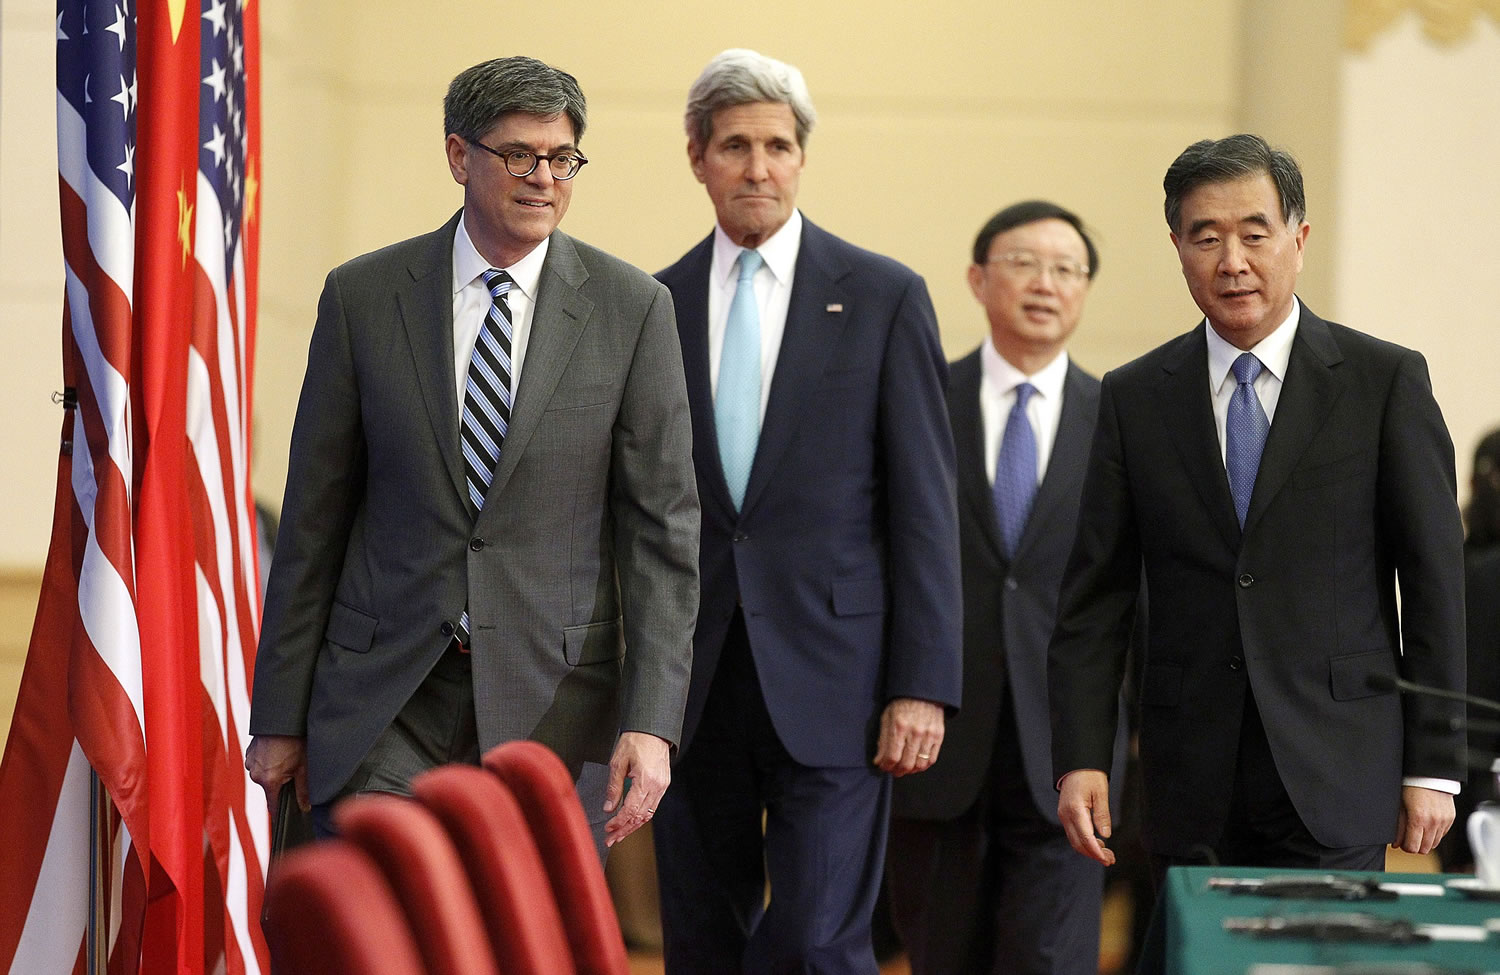 Left to right: U.S. Treasury Secretary Jack Lew, Secretary of State John Kerry, Chinau2019s State Councilor Yang Jiechi and Vice Premier Wang Yang arrive to deliver joint statements at the Great Hall of the People in Beijing on Thursday.